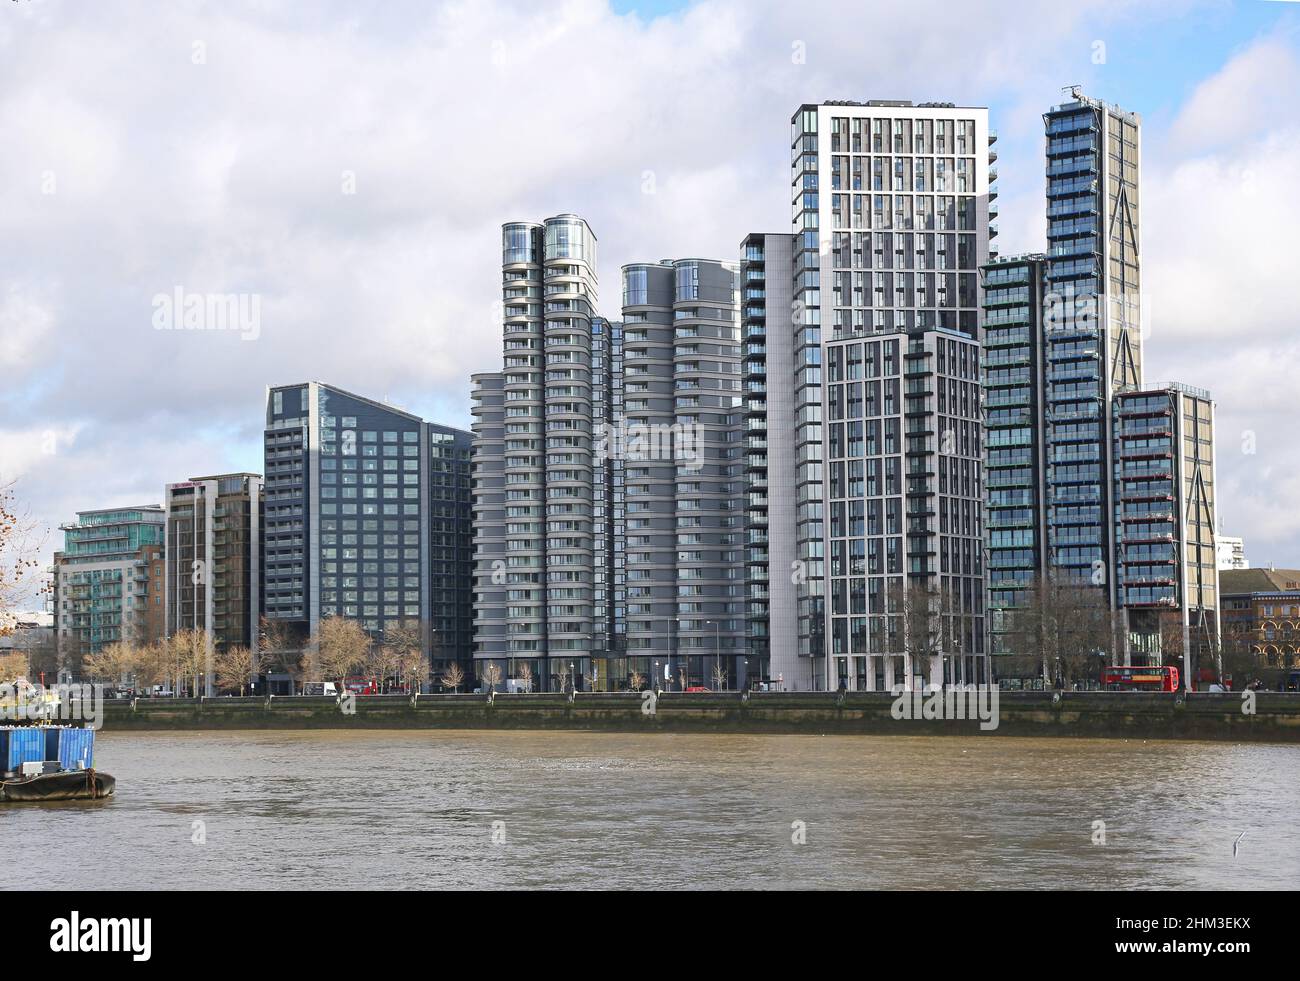 New apartment blocks on London's Albert Embankment. Shows The Corniche by Foster + Partners (centre) and Merano Residences by Richard Rogers (right). Stock Photo